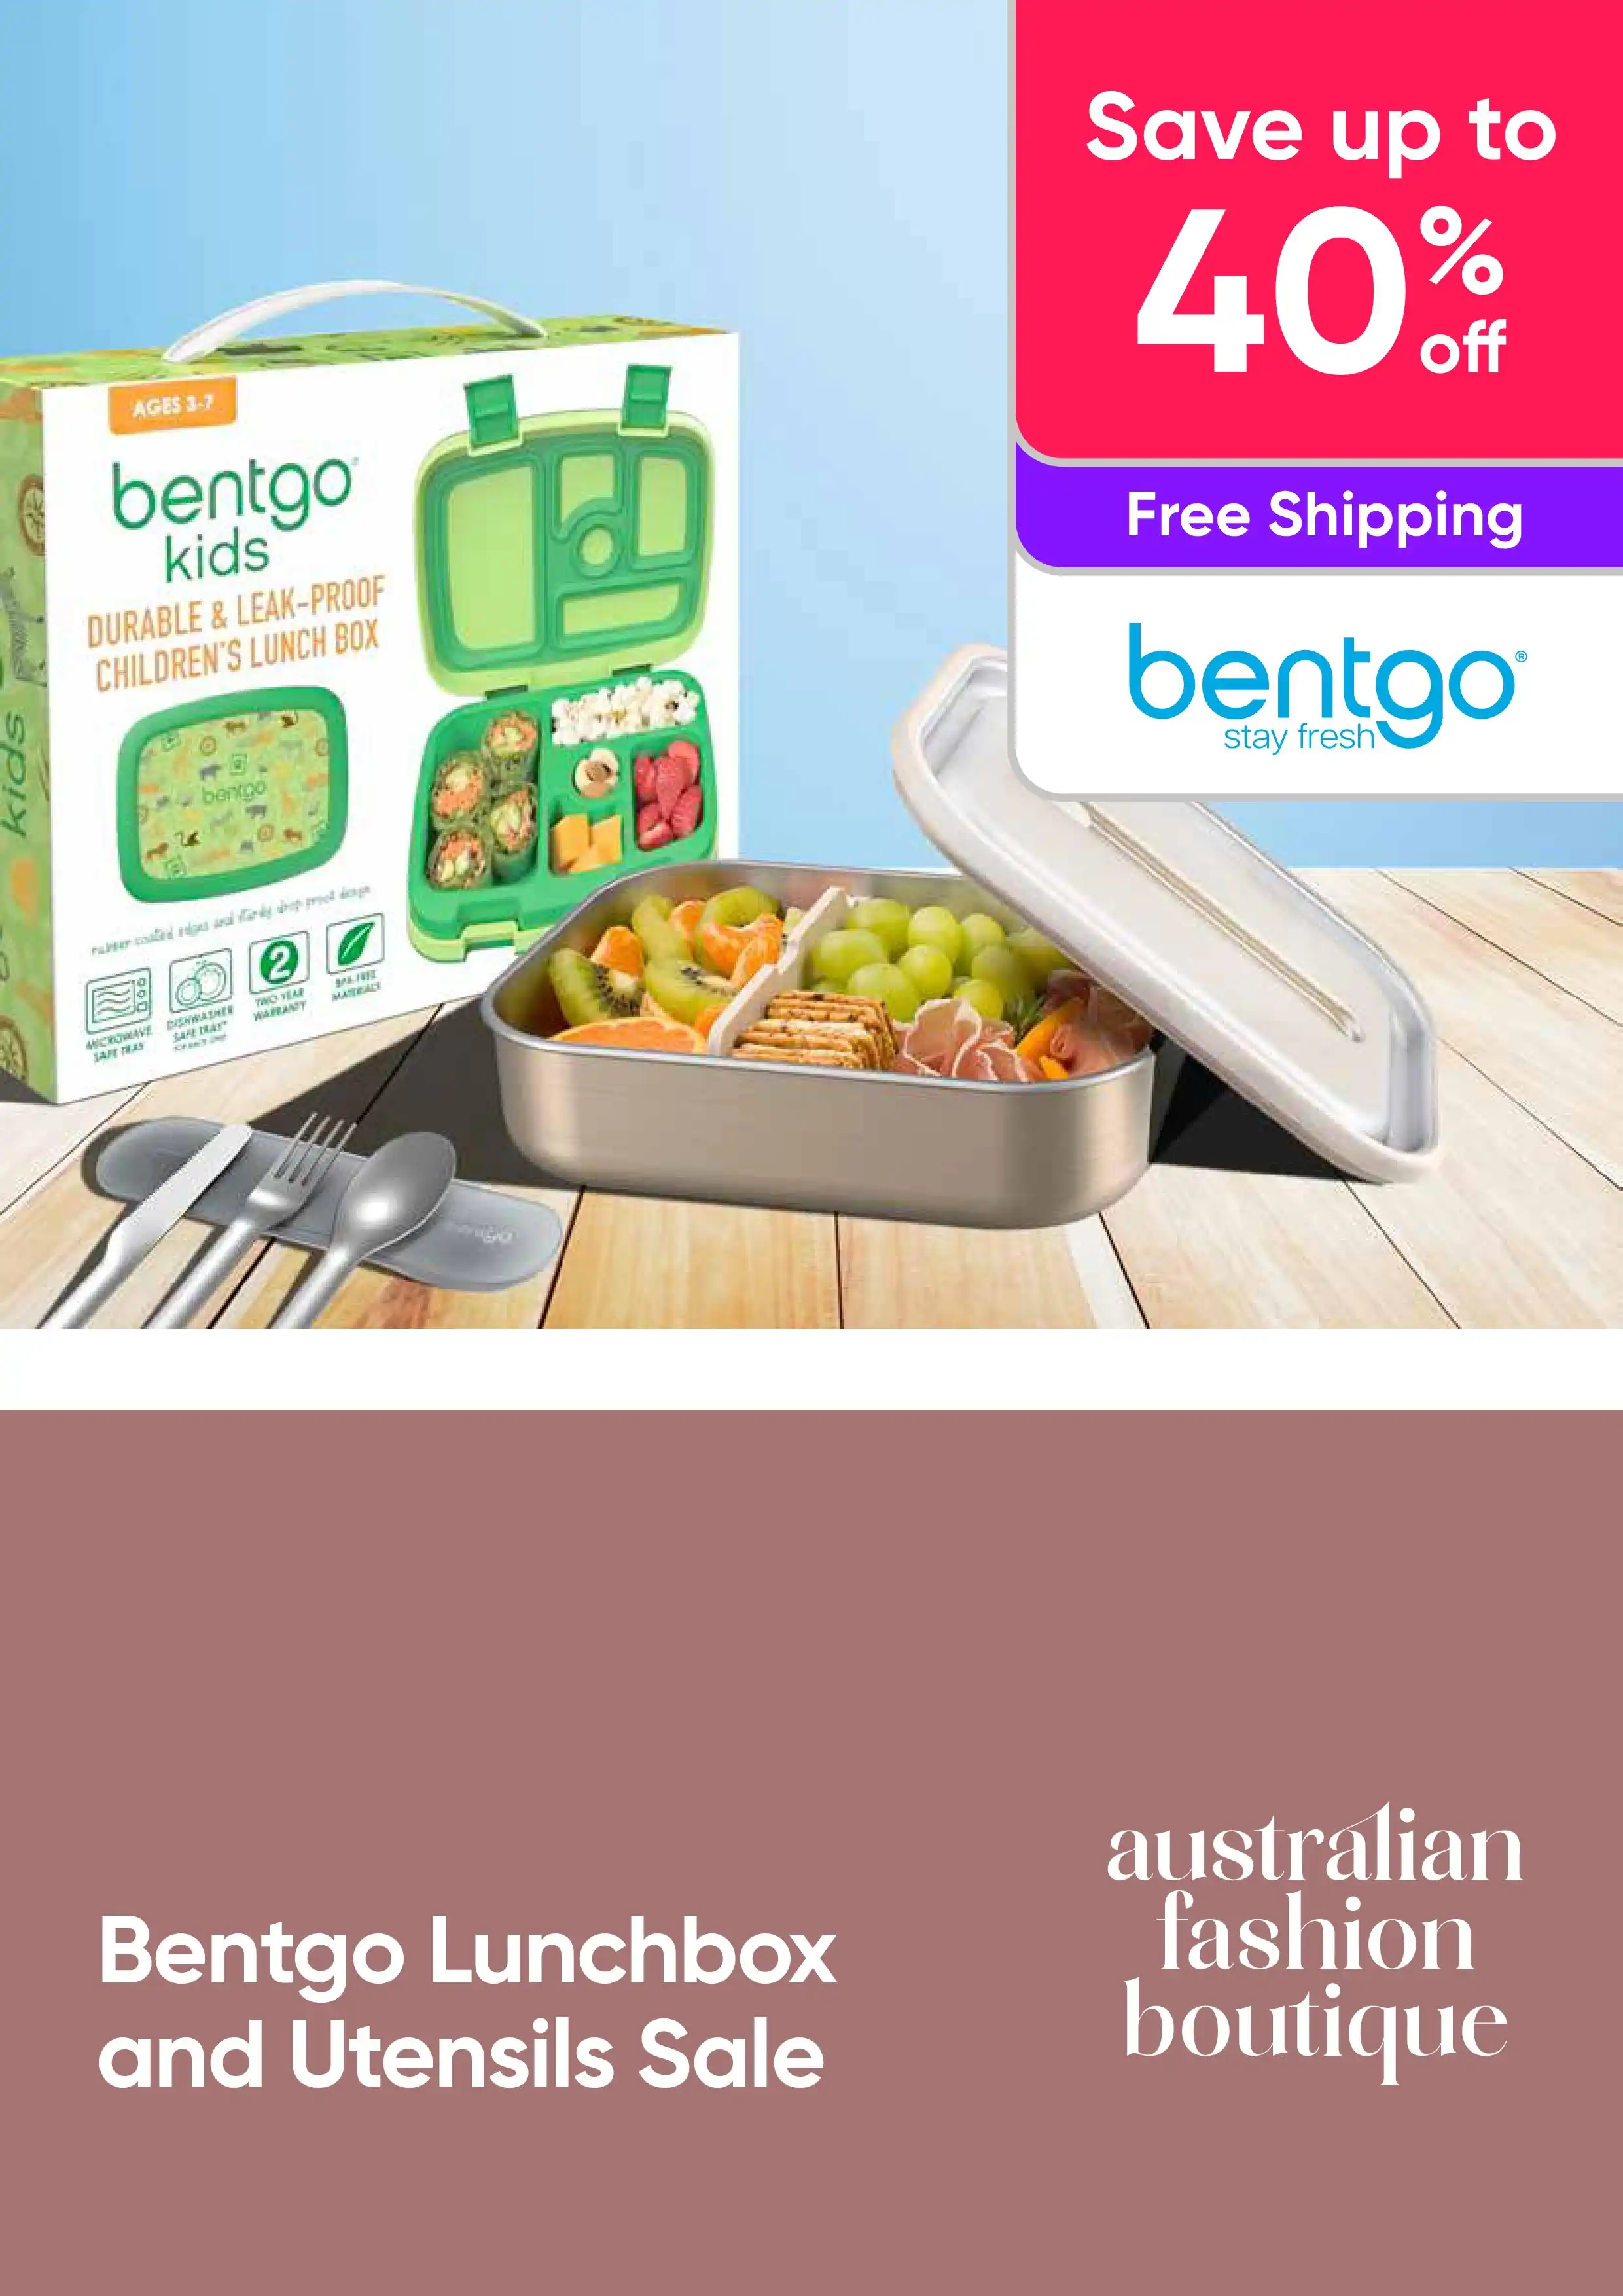 Bentgo Lunchbox and Utensils Sale - Save up to 40% Off RRP